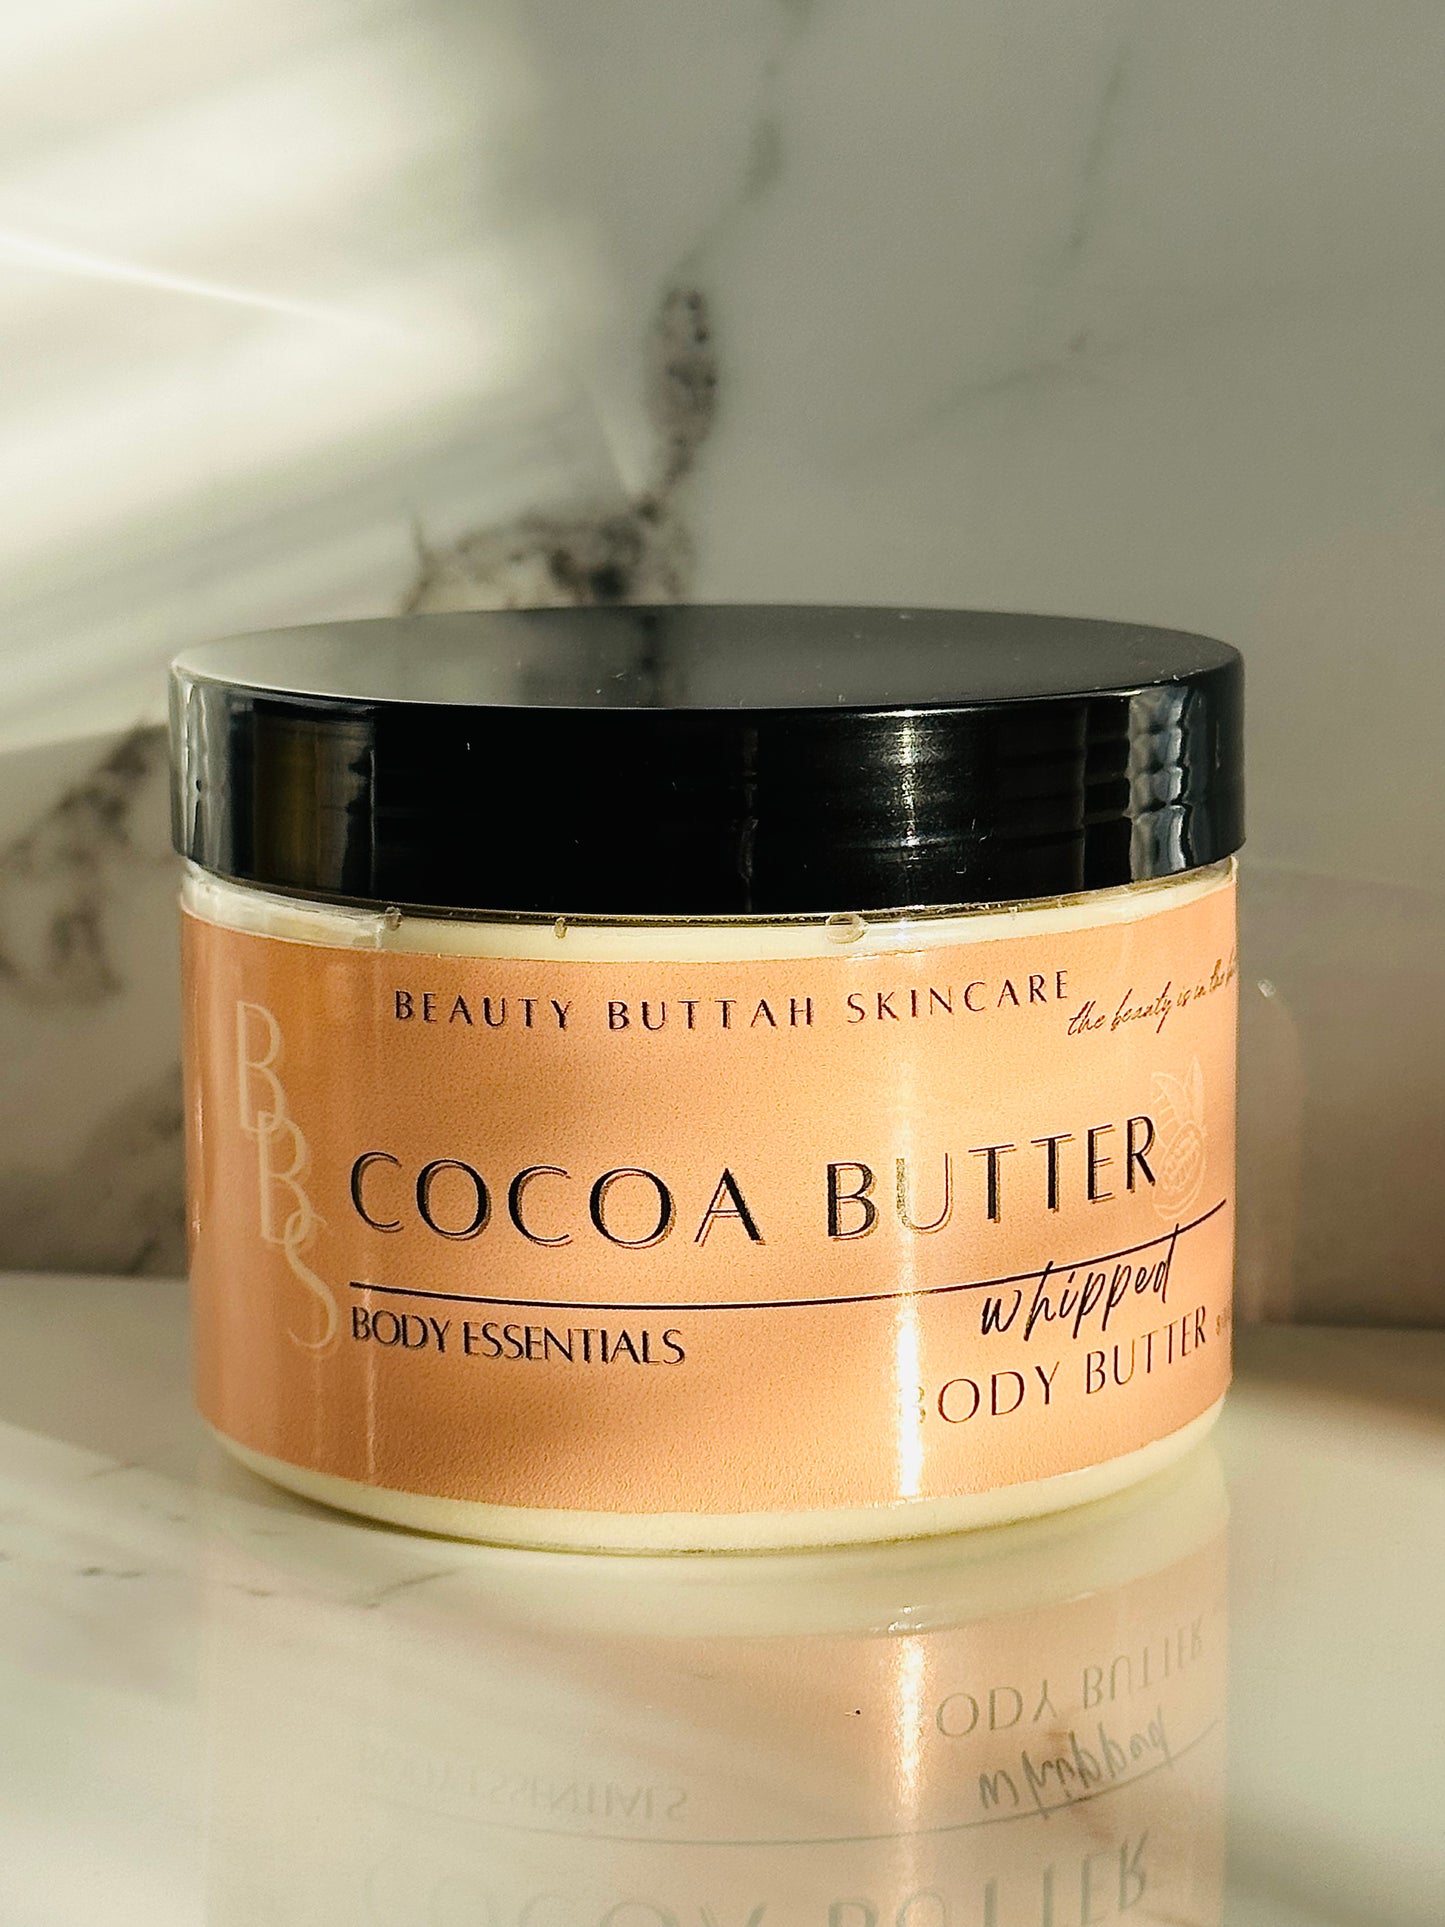 BODY ESSENTIALS I WHIPPED COCOA BUTTER BODY BUTTER